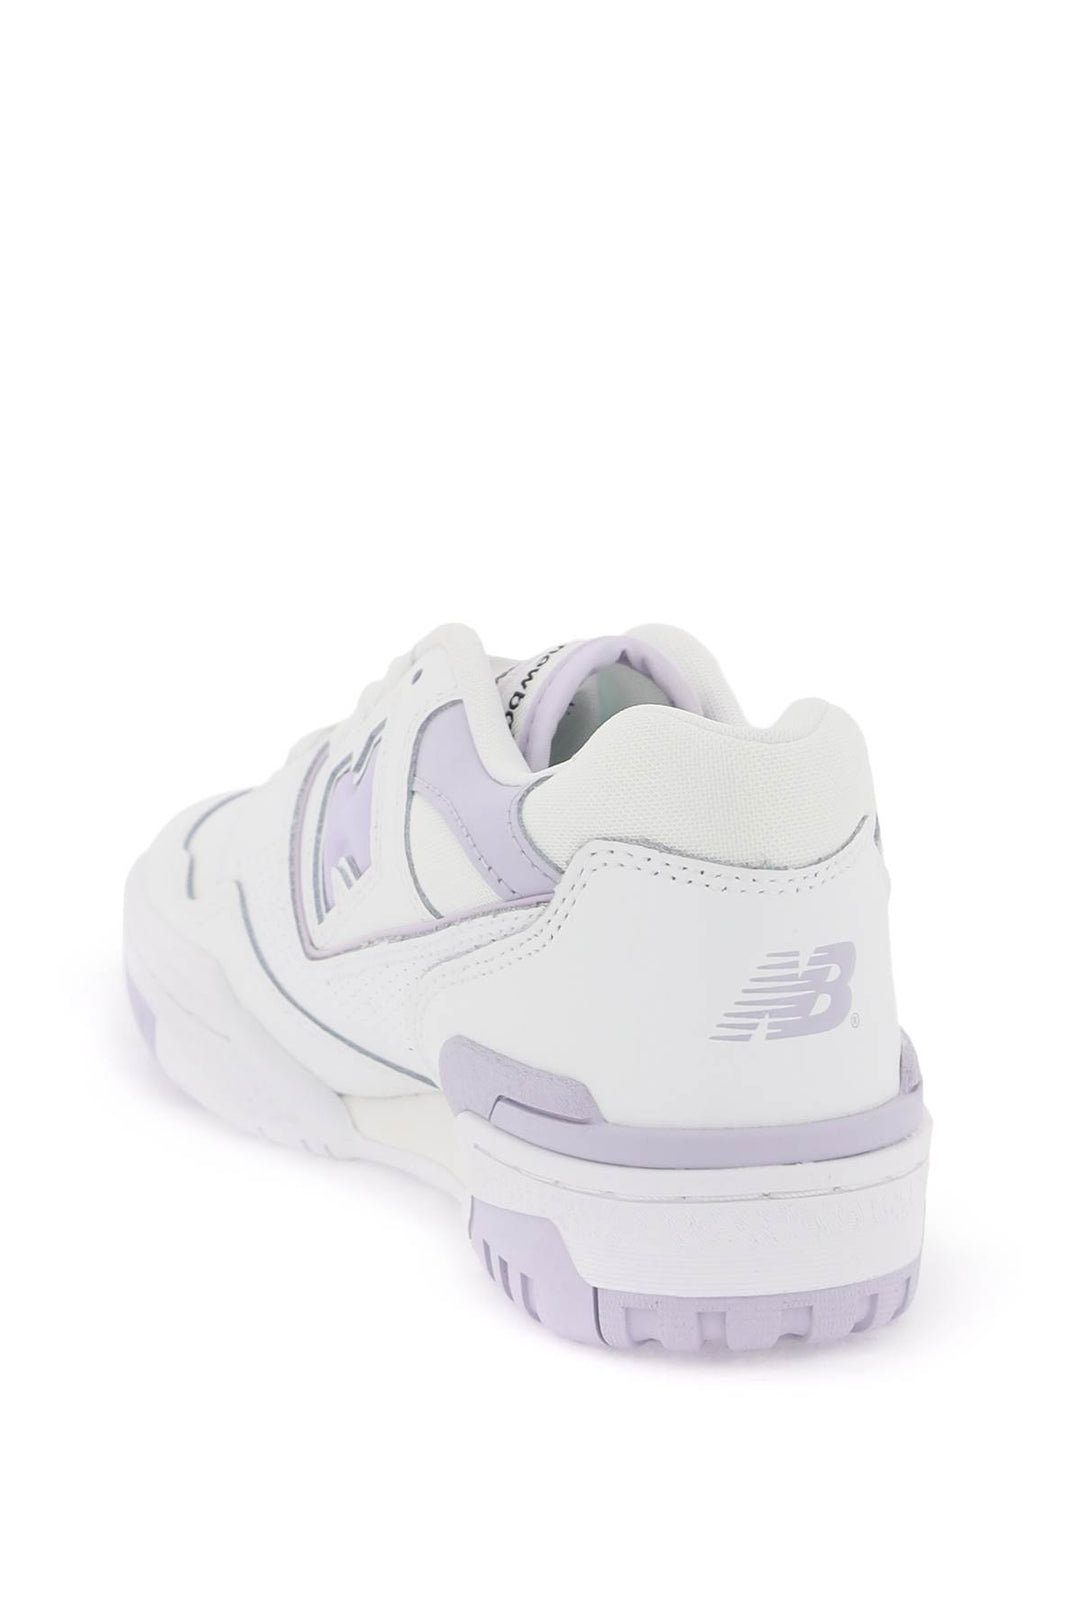 New Balance 550 Sneakers   White